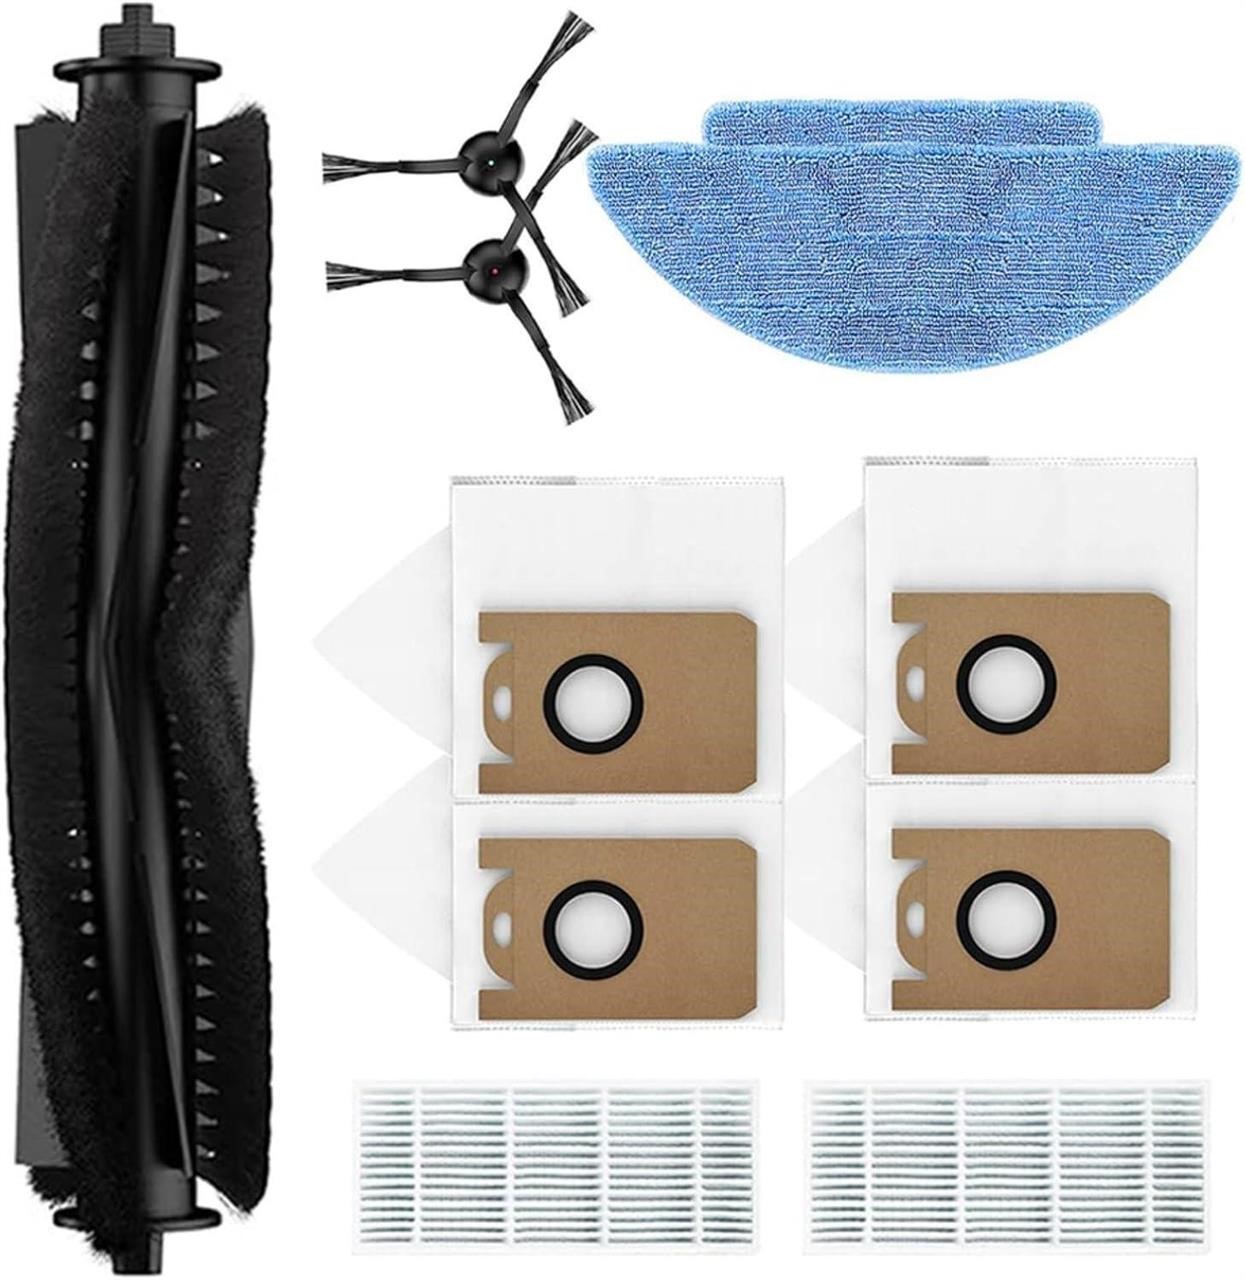 Attachments for robot vacuum cleaner